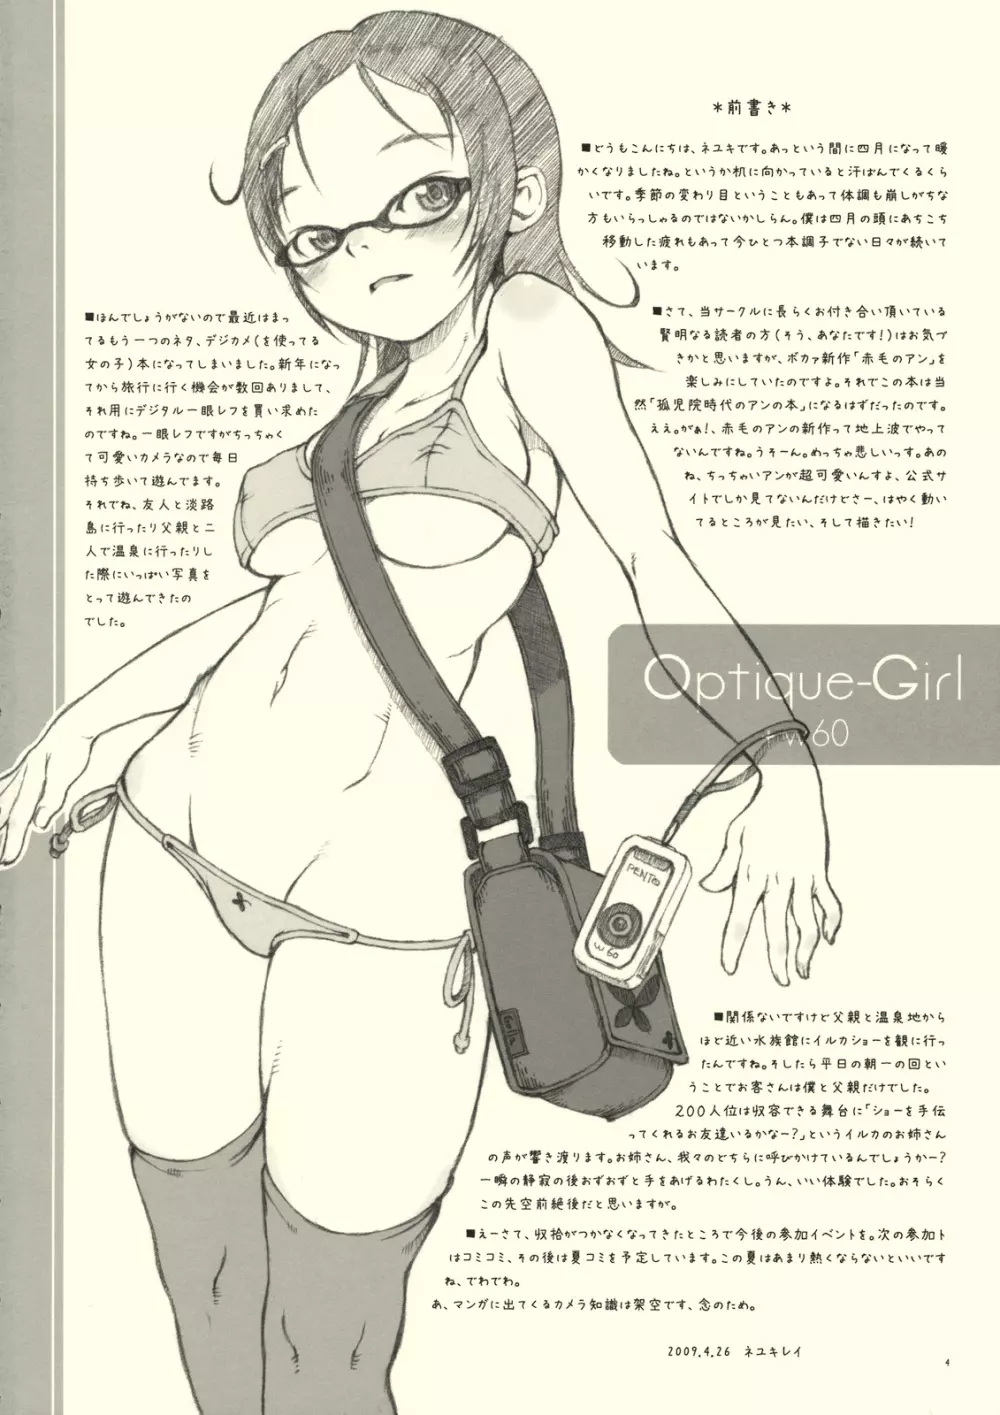 Optique-Girl Page.3